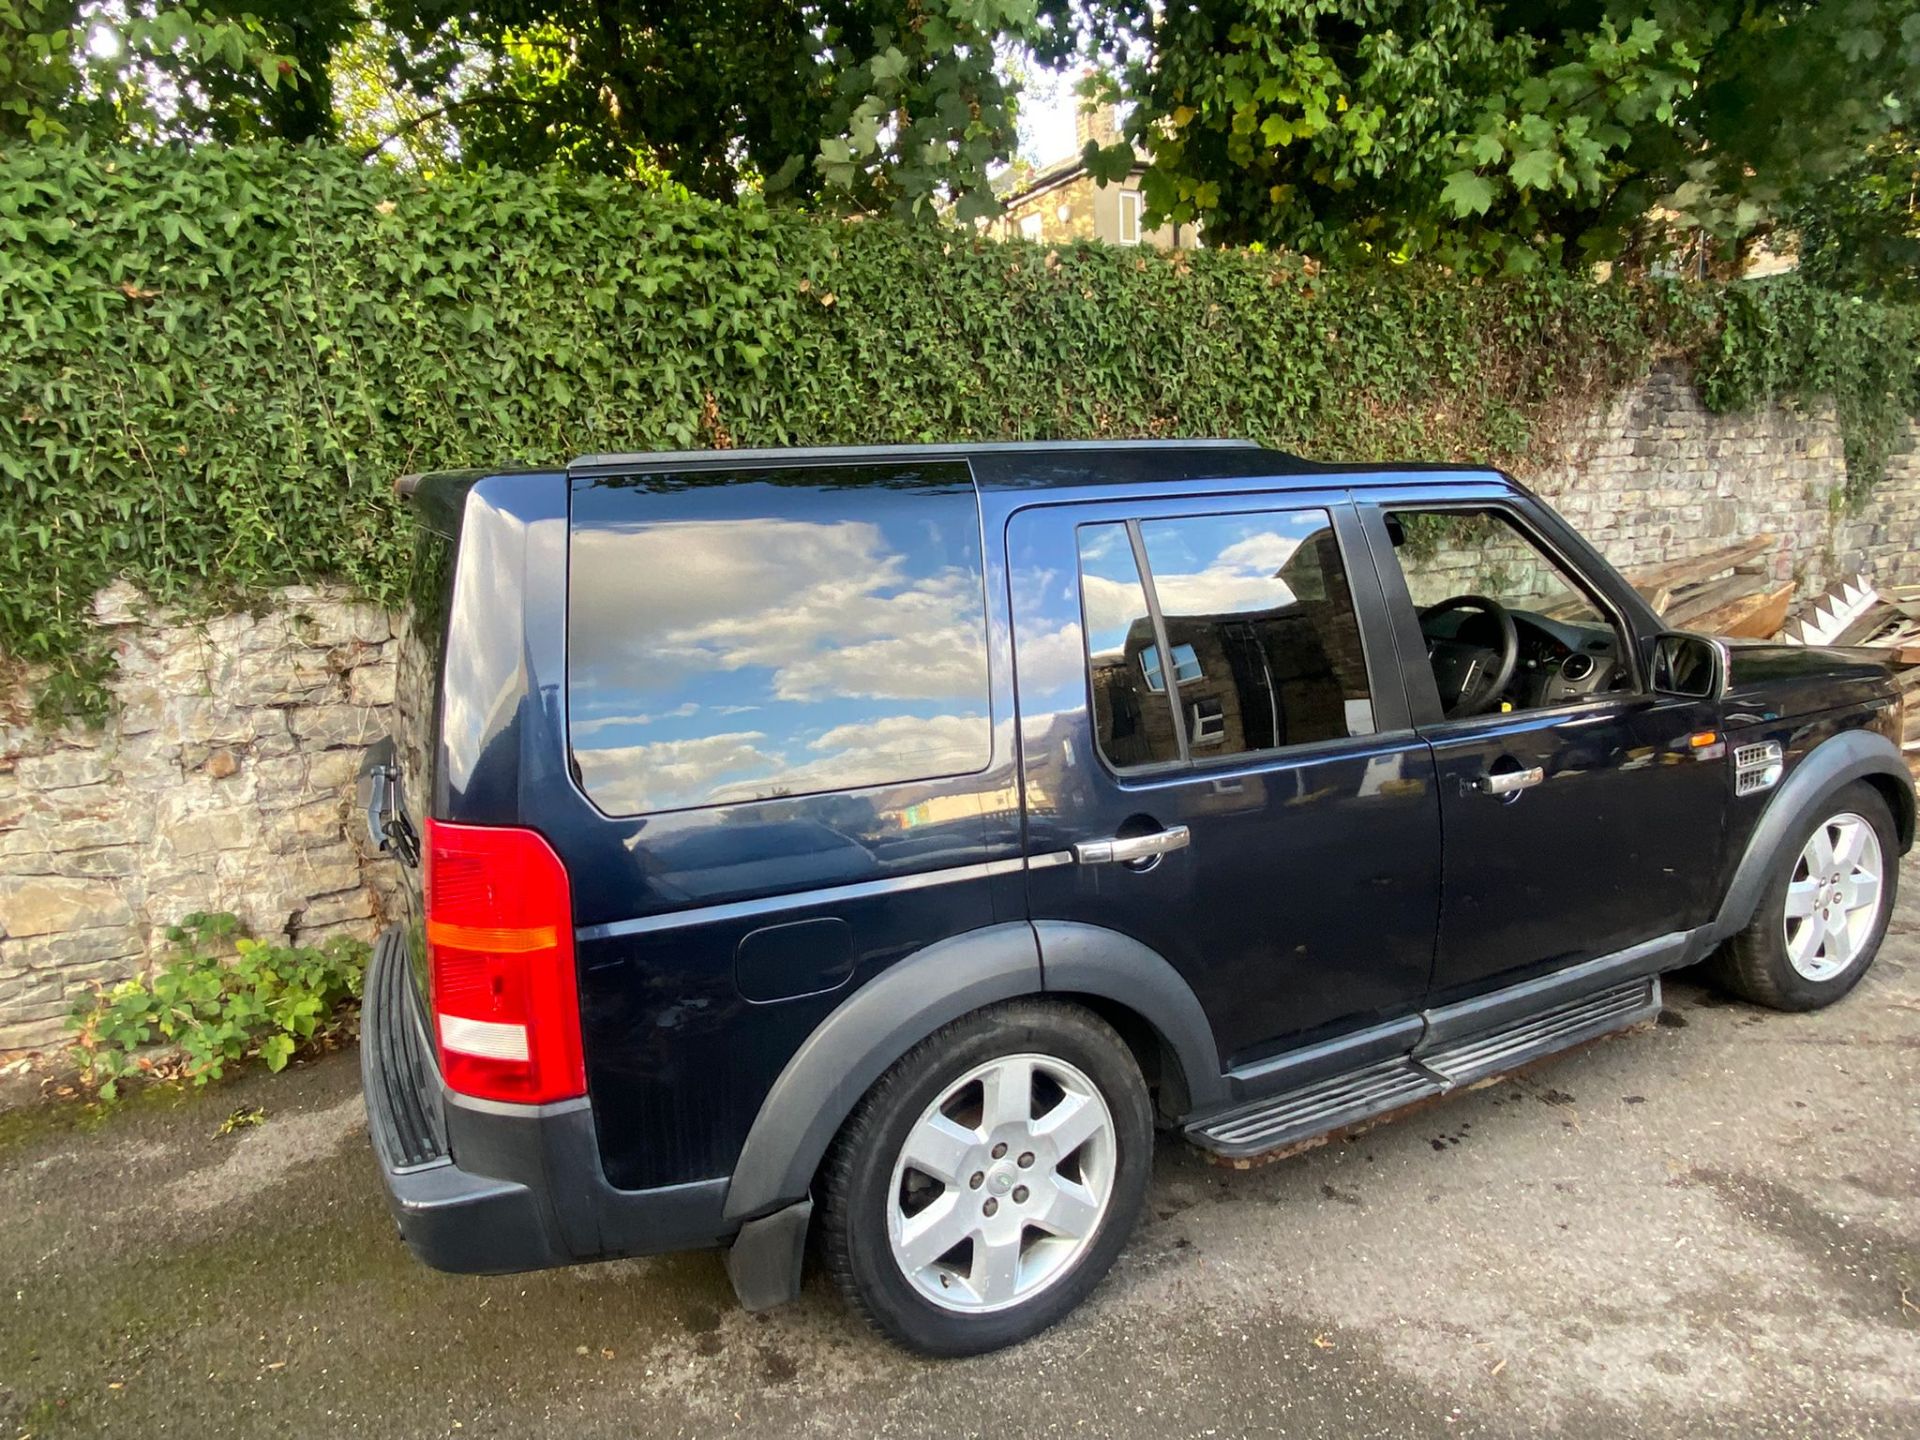 2004 54 Land Rover Discovery 3 2.7 TDV6 HSE Automatic - HIGH SPEC - AIR SUSPENSION *NO VAT* - Image 3 of 9